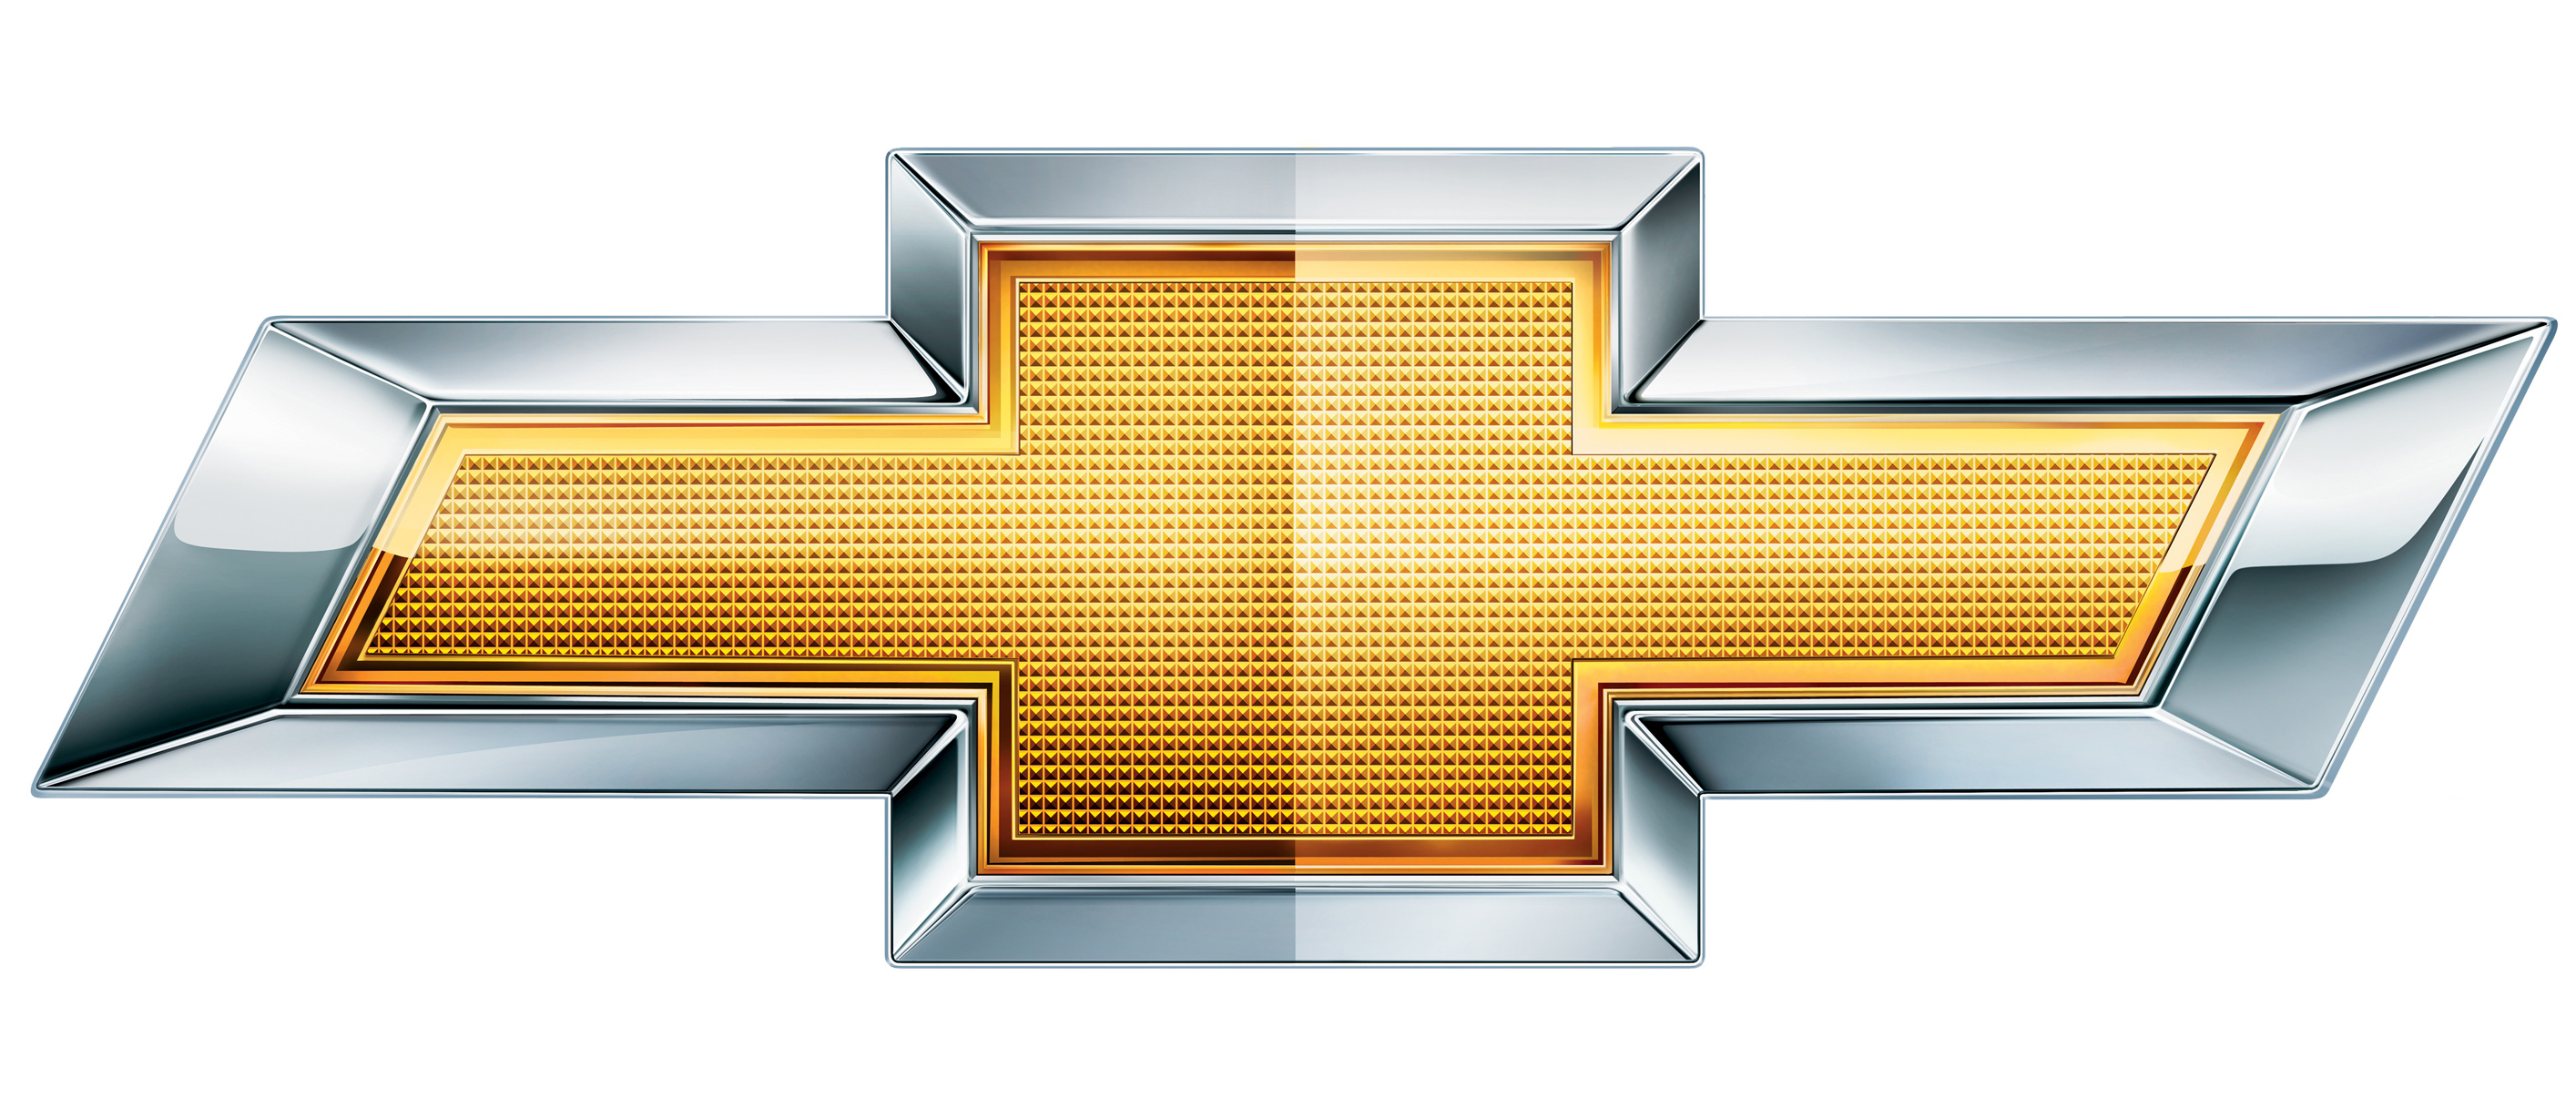 chevy logo Chevy bowtie free download clip art on clipart jpg